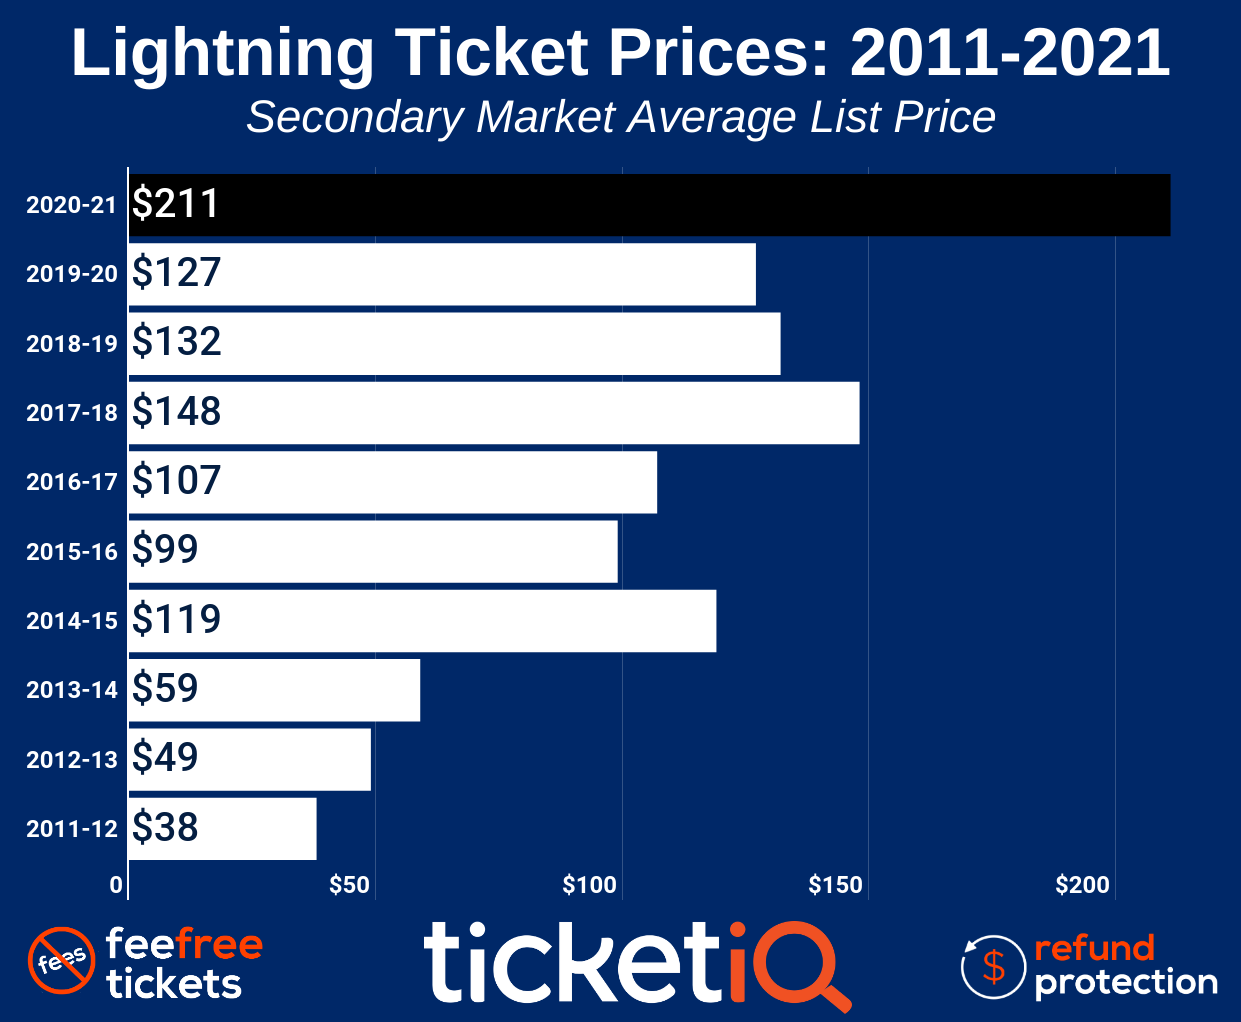 How To Find The Cheapest Tampa Bay Lightning Tickets + Face Value Options